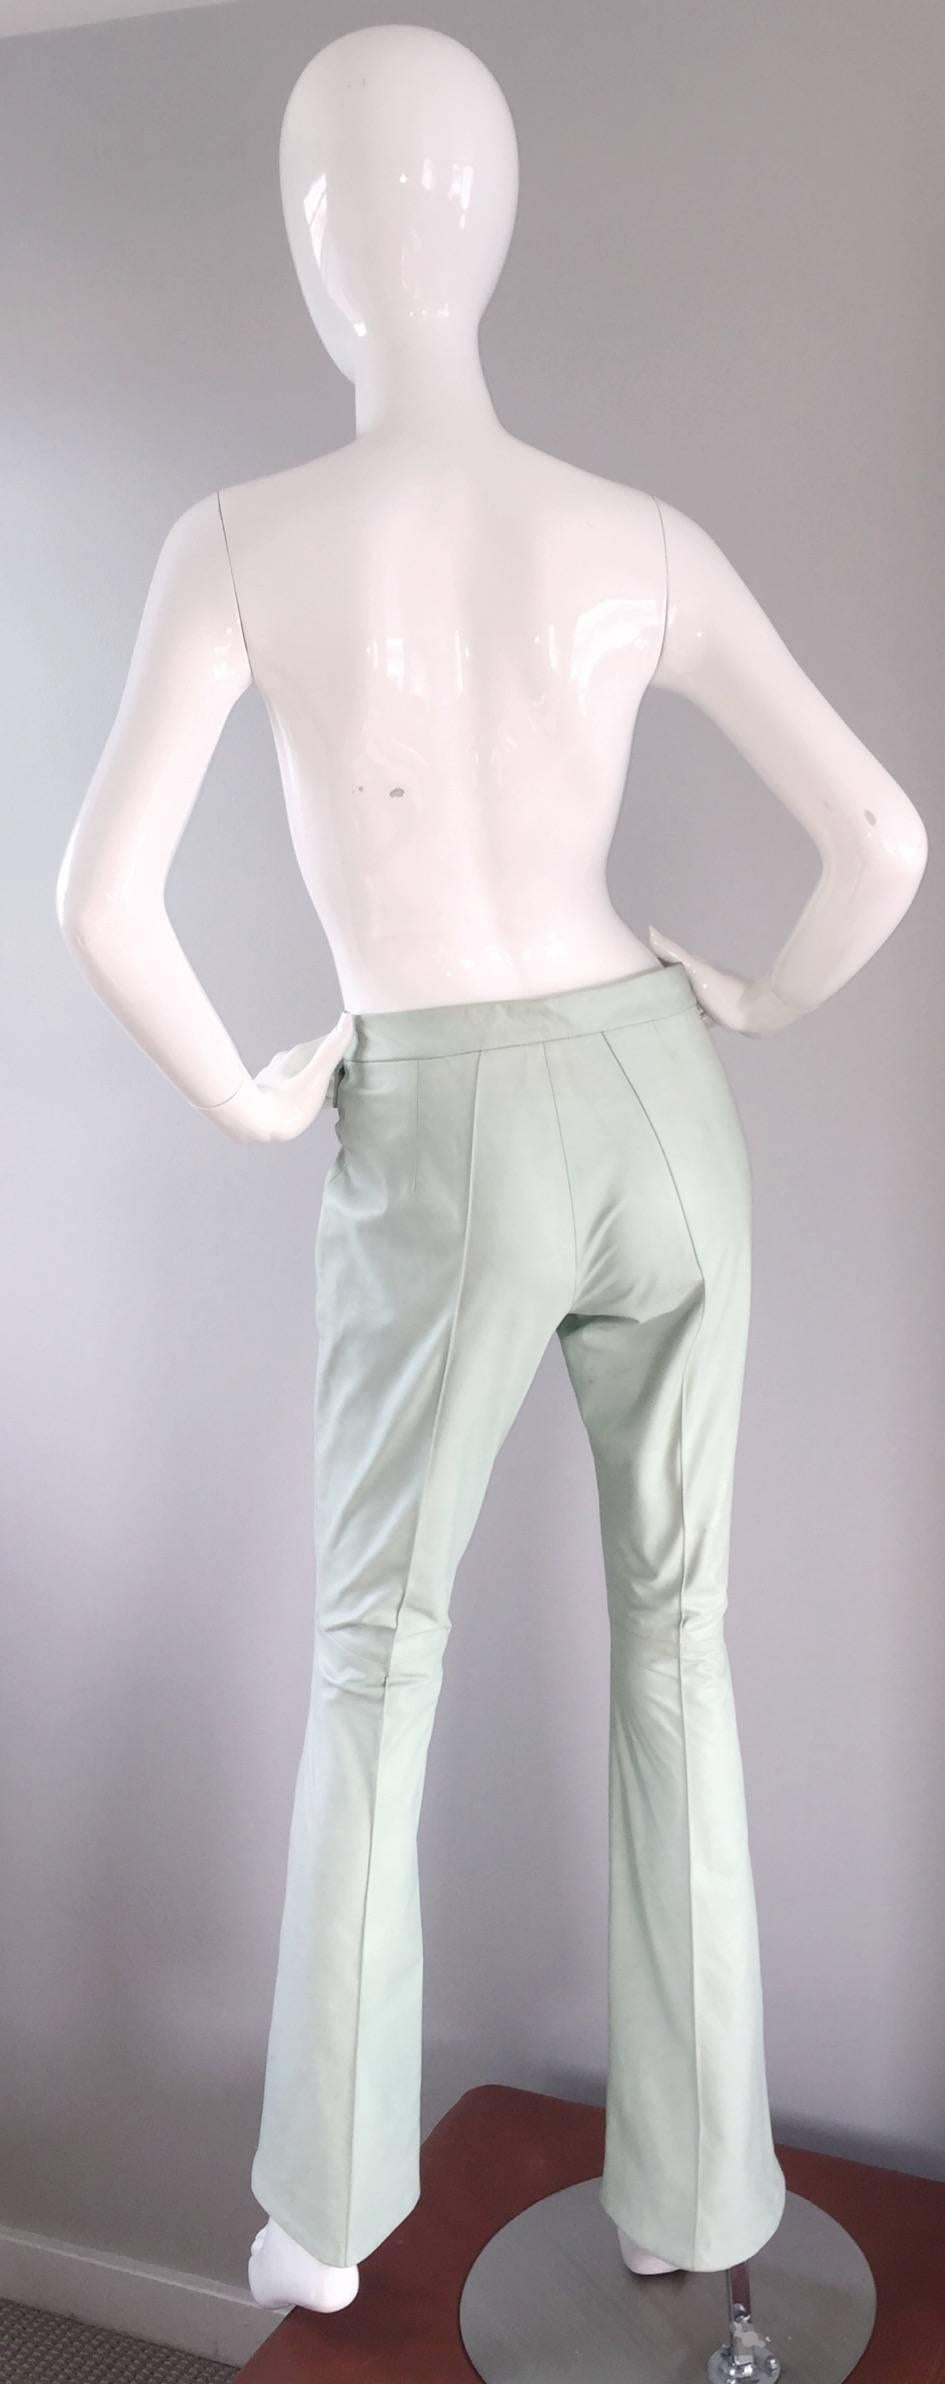 Rare, and INCREDIBLE vintage John Galliano leather trousers! From the early 90s, these have retained so much style, with the color, silhouette, and construction! Soft leather, with two mock front pockets. Slim, skinny fit, with a mid-rise waist, and